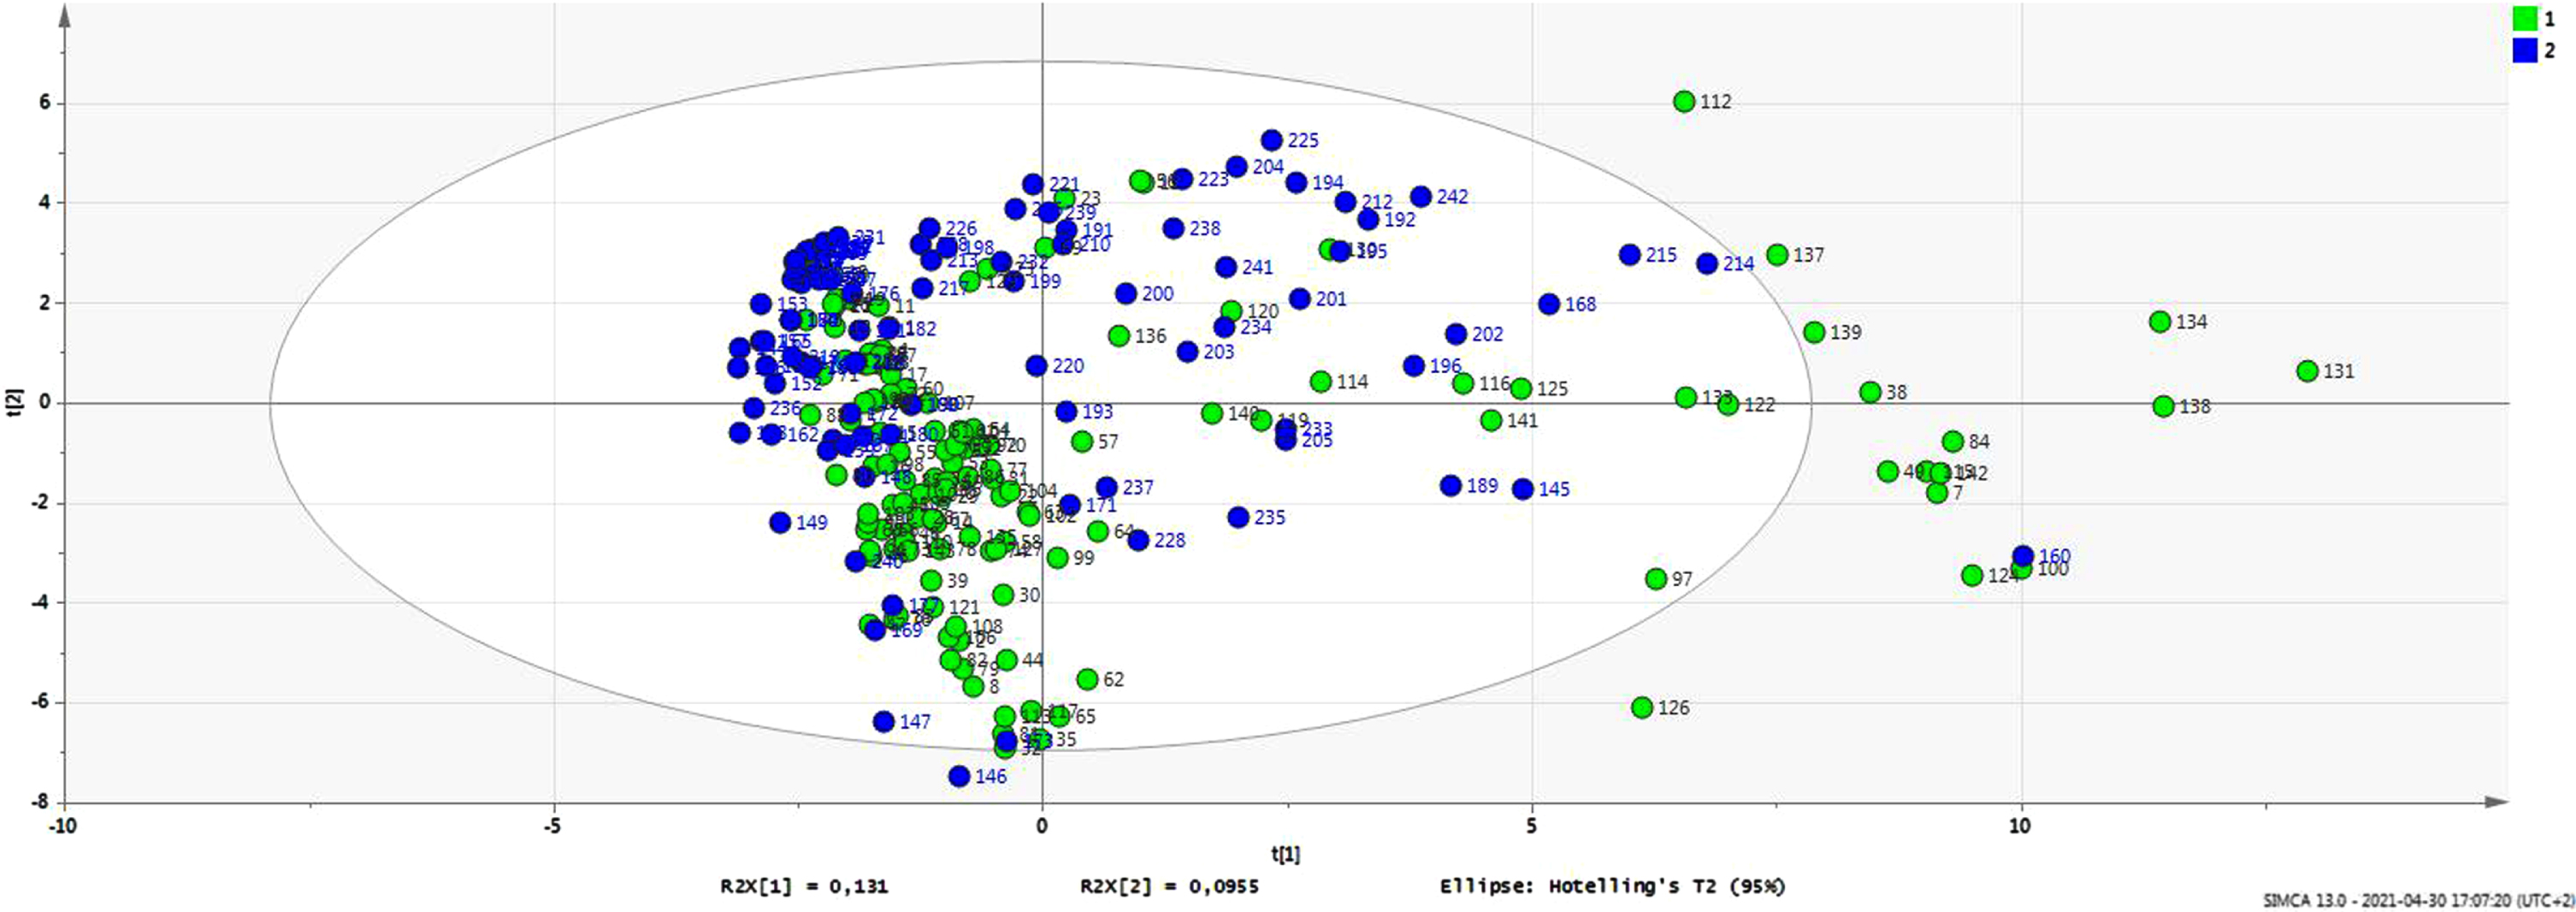 PCA (Principal Component Analysis) Score Scatter Plot. The scatter plot provides a graphical overview of all the obtained data with each point corresponding to one individual. The PCA score shows trends and diversity within the sample as well as detect outliers. In this dataset where both groups are combined, the outliers reveal those individuals with a very high or very low NOT-S score. There were also more outliers in the DM1 group. The green colour represents the group with Myotonic dystrophy type 1, and the blue colour Duchenne muscular dystrophy.